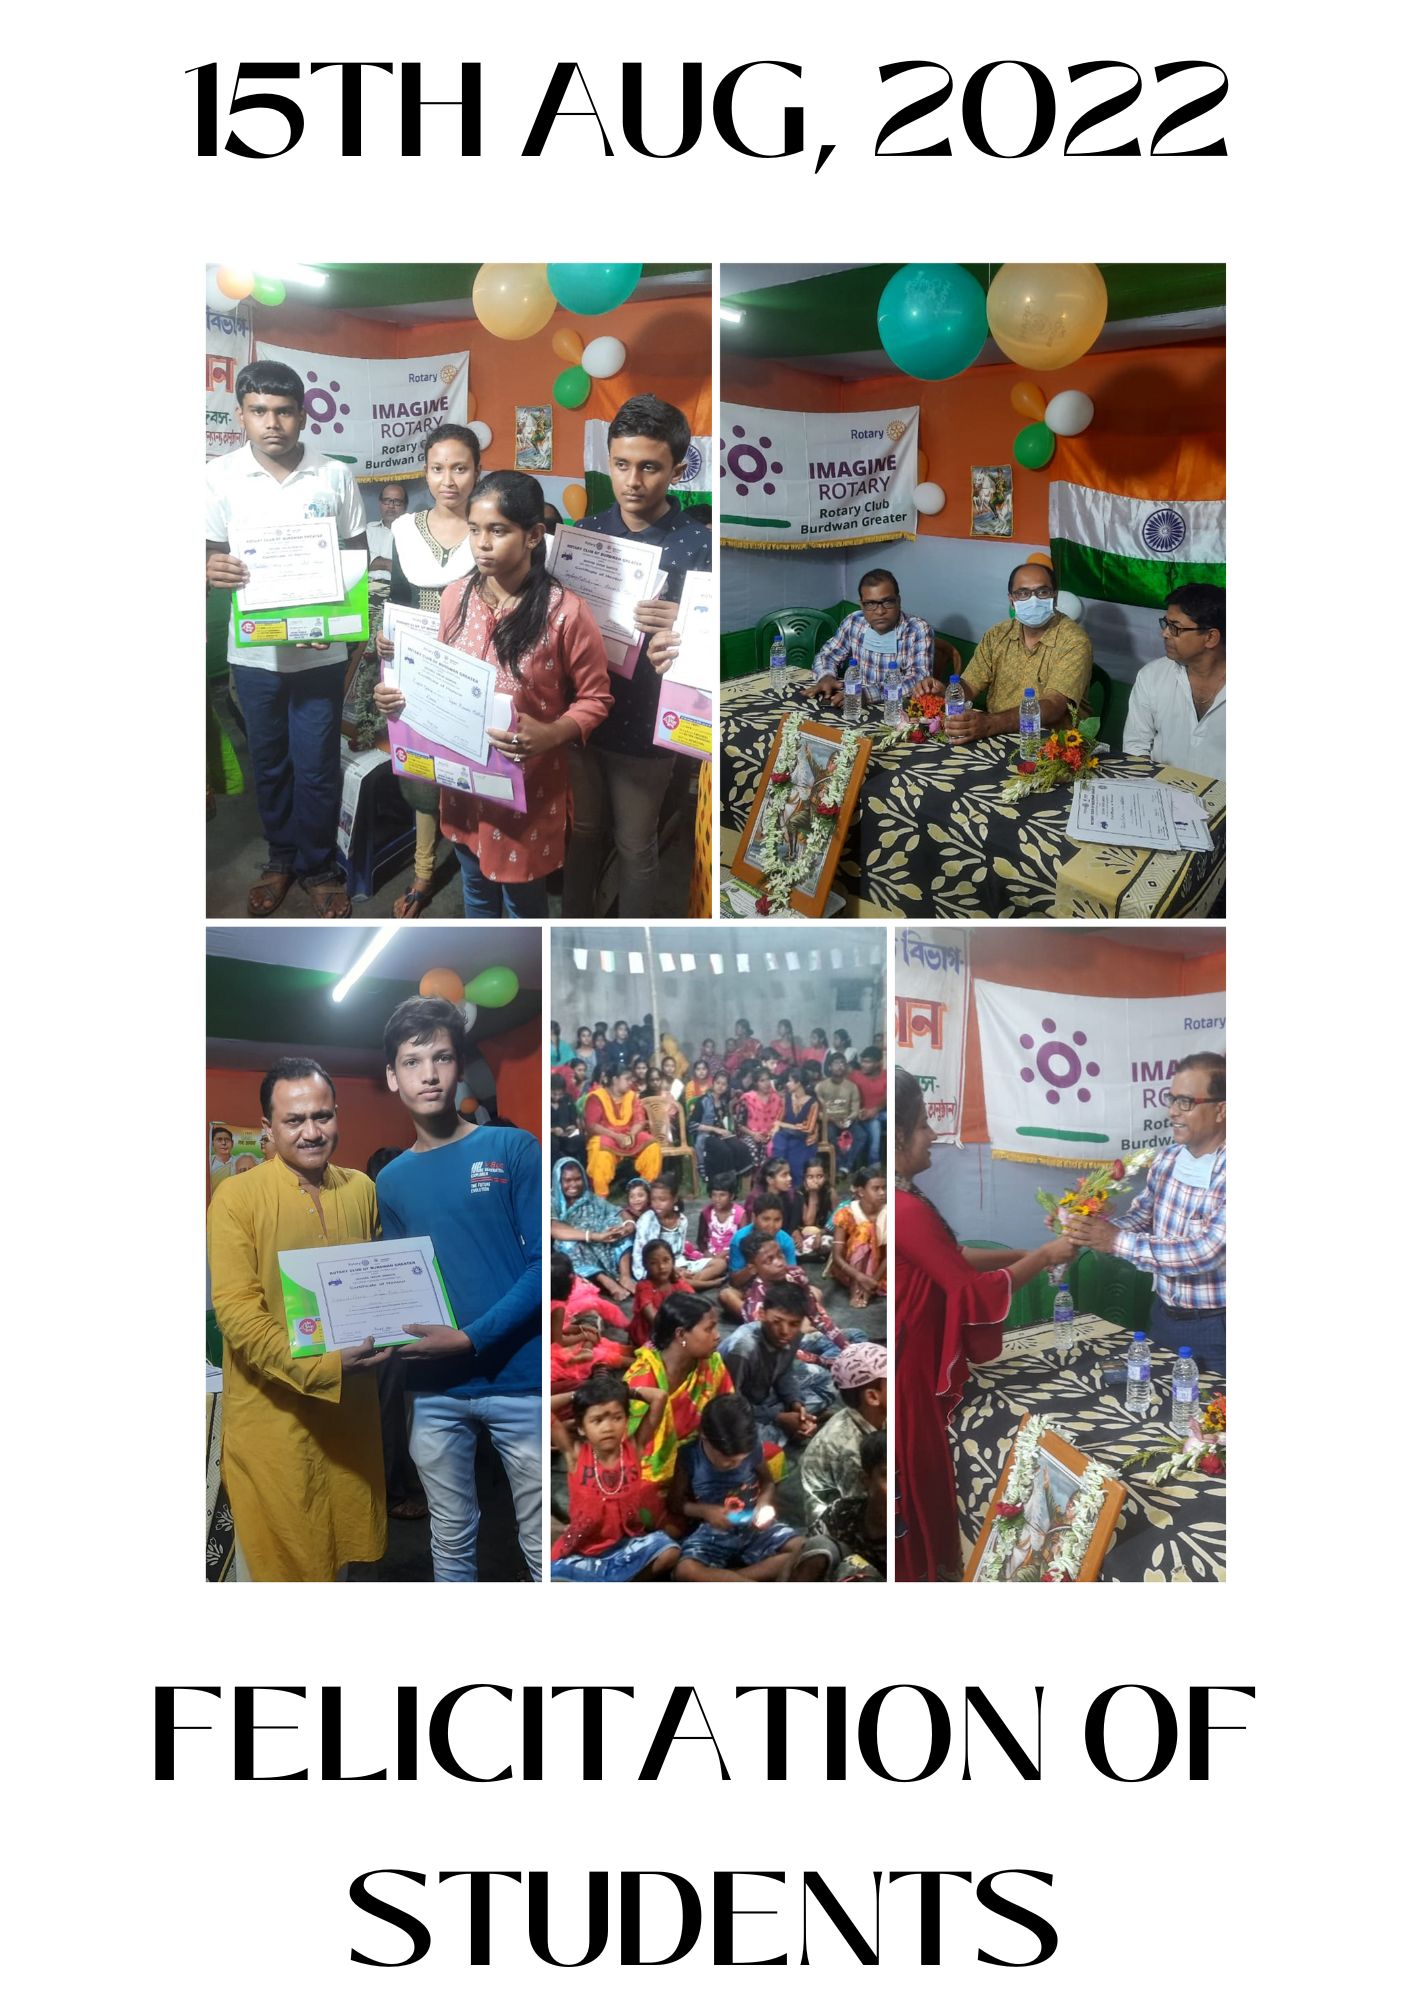 FELICITATION OF AT DEHURA, JOINTLY WITH RCC (15 AUGUST)